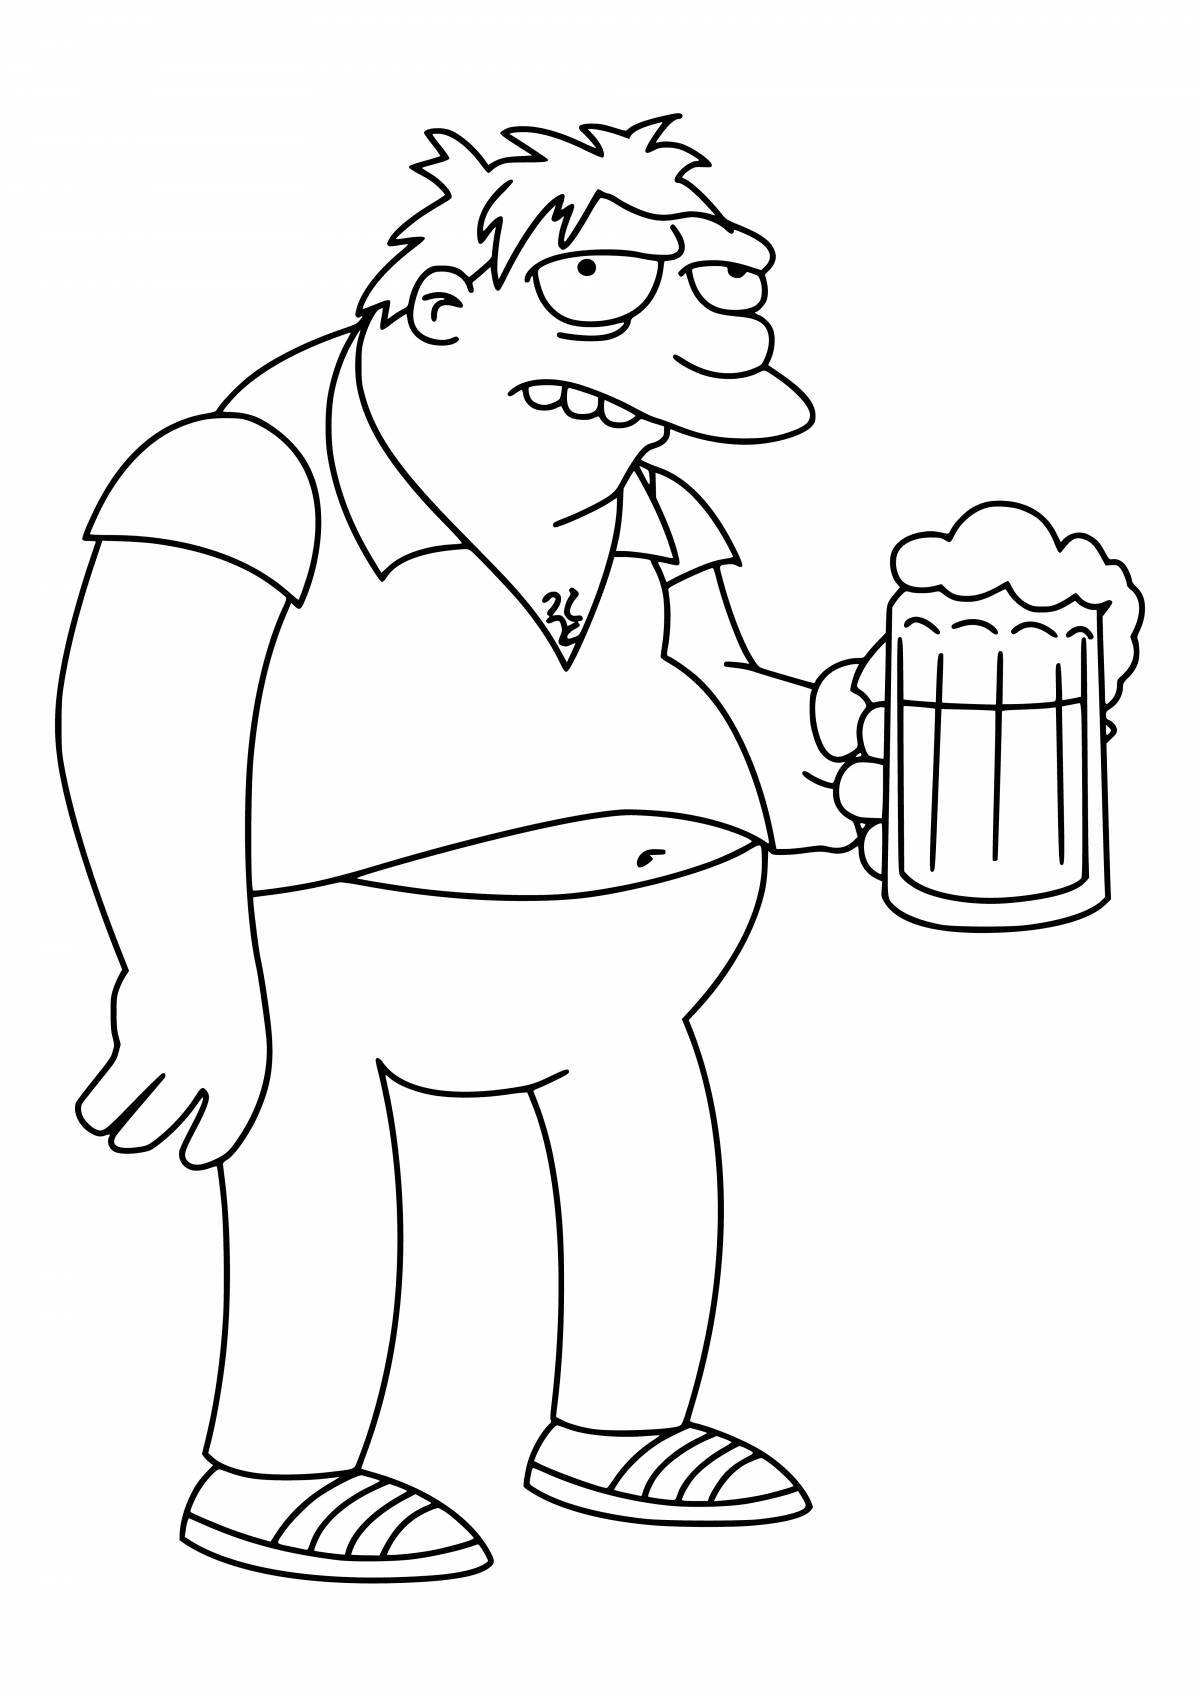 Drink Refreshing Coloring Page